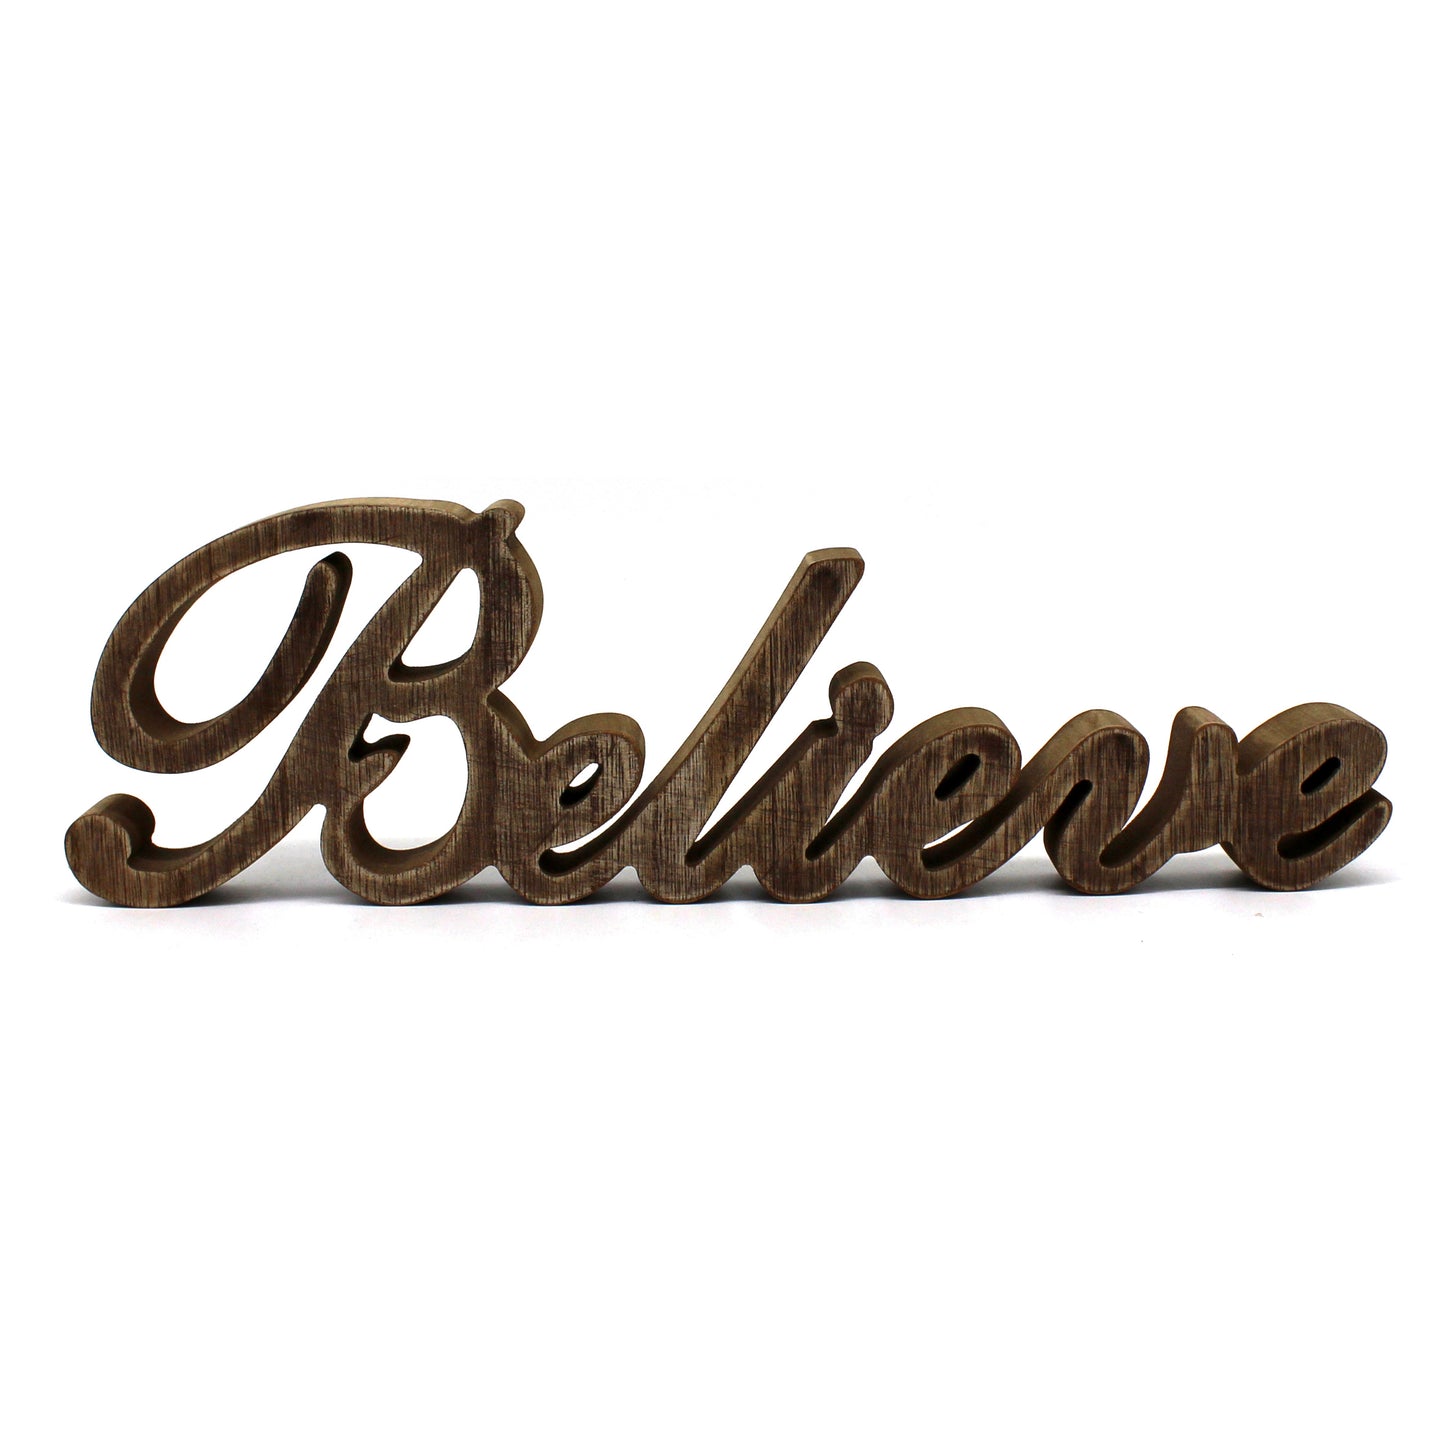 CVHOMEDECO. Rustic Vintage Distressed Wooden Words Sign Free Standing "Believe" Tabletop/Shelf/Home Wall/Office Decoration Art, 14.25 x 4.25 x 1 Inch